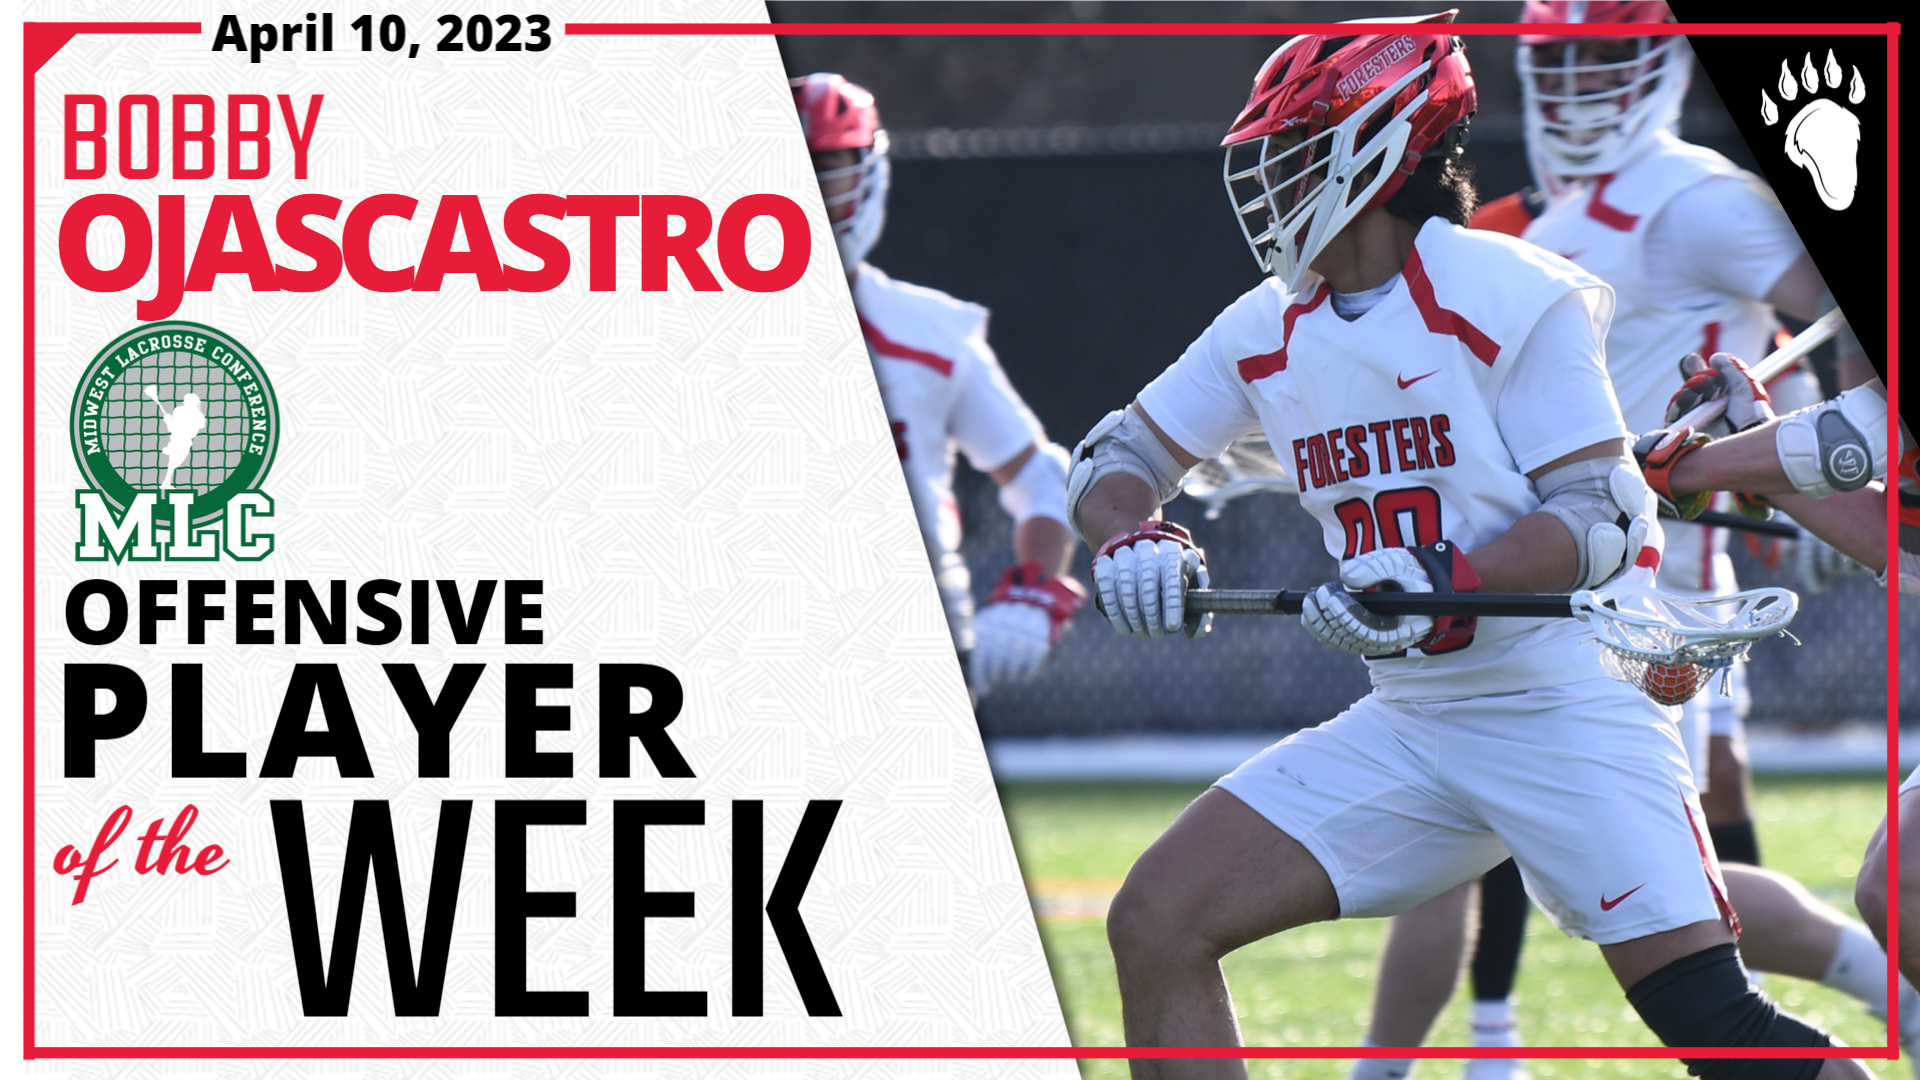 Bobby Ojascastro Named MLC Offensive Player of the Week